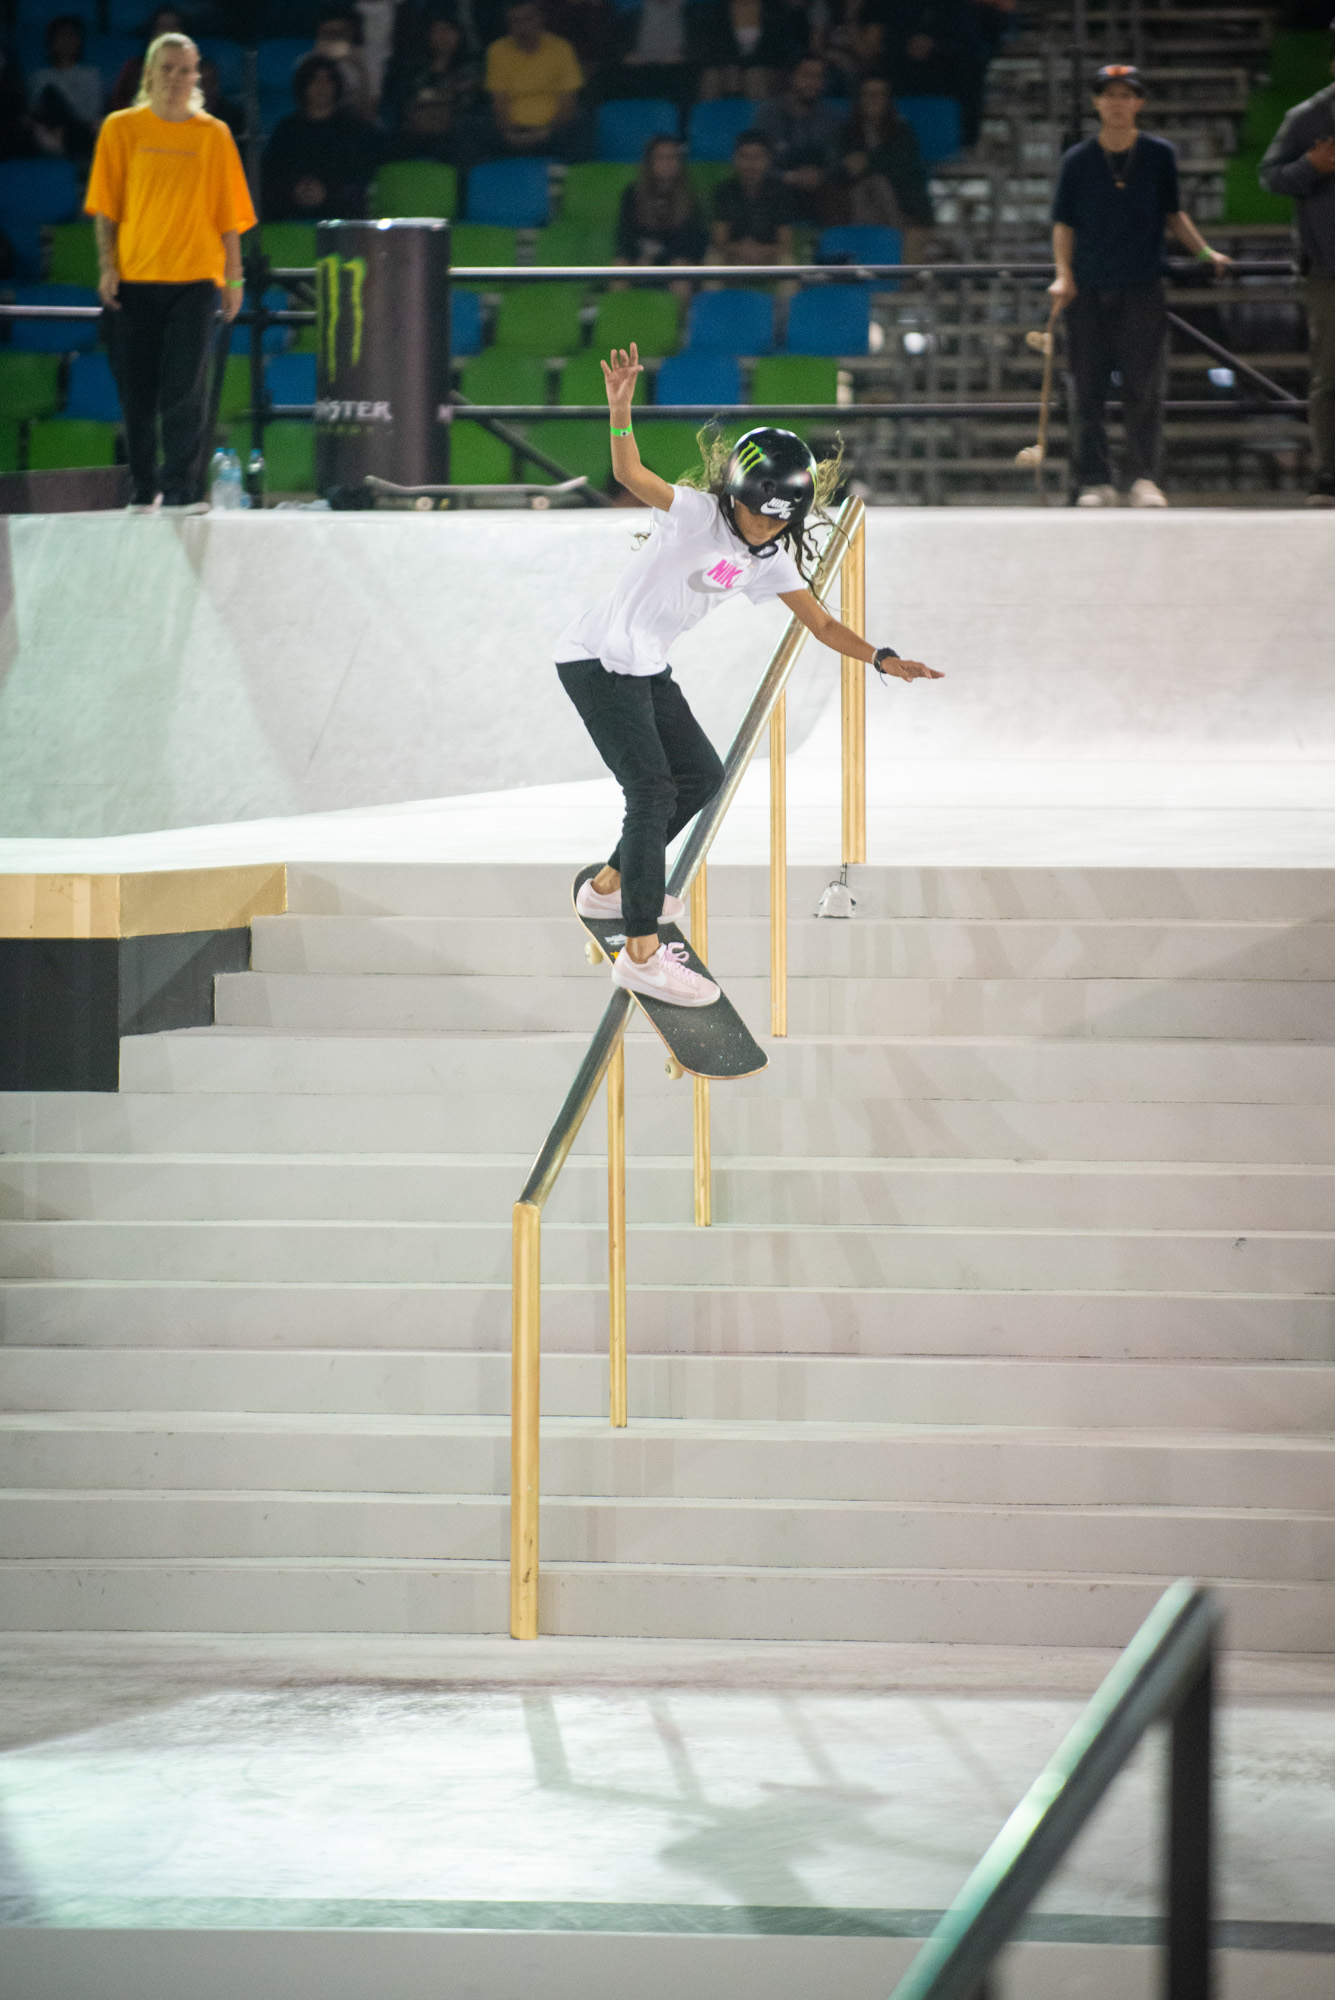 Monster Energy's Brazilian Skate Prodigy Rayssa Leal Claims Second Place in Women’s World Championship